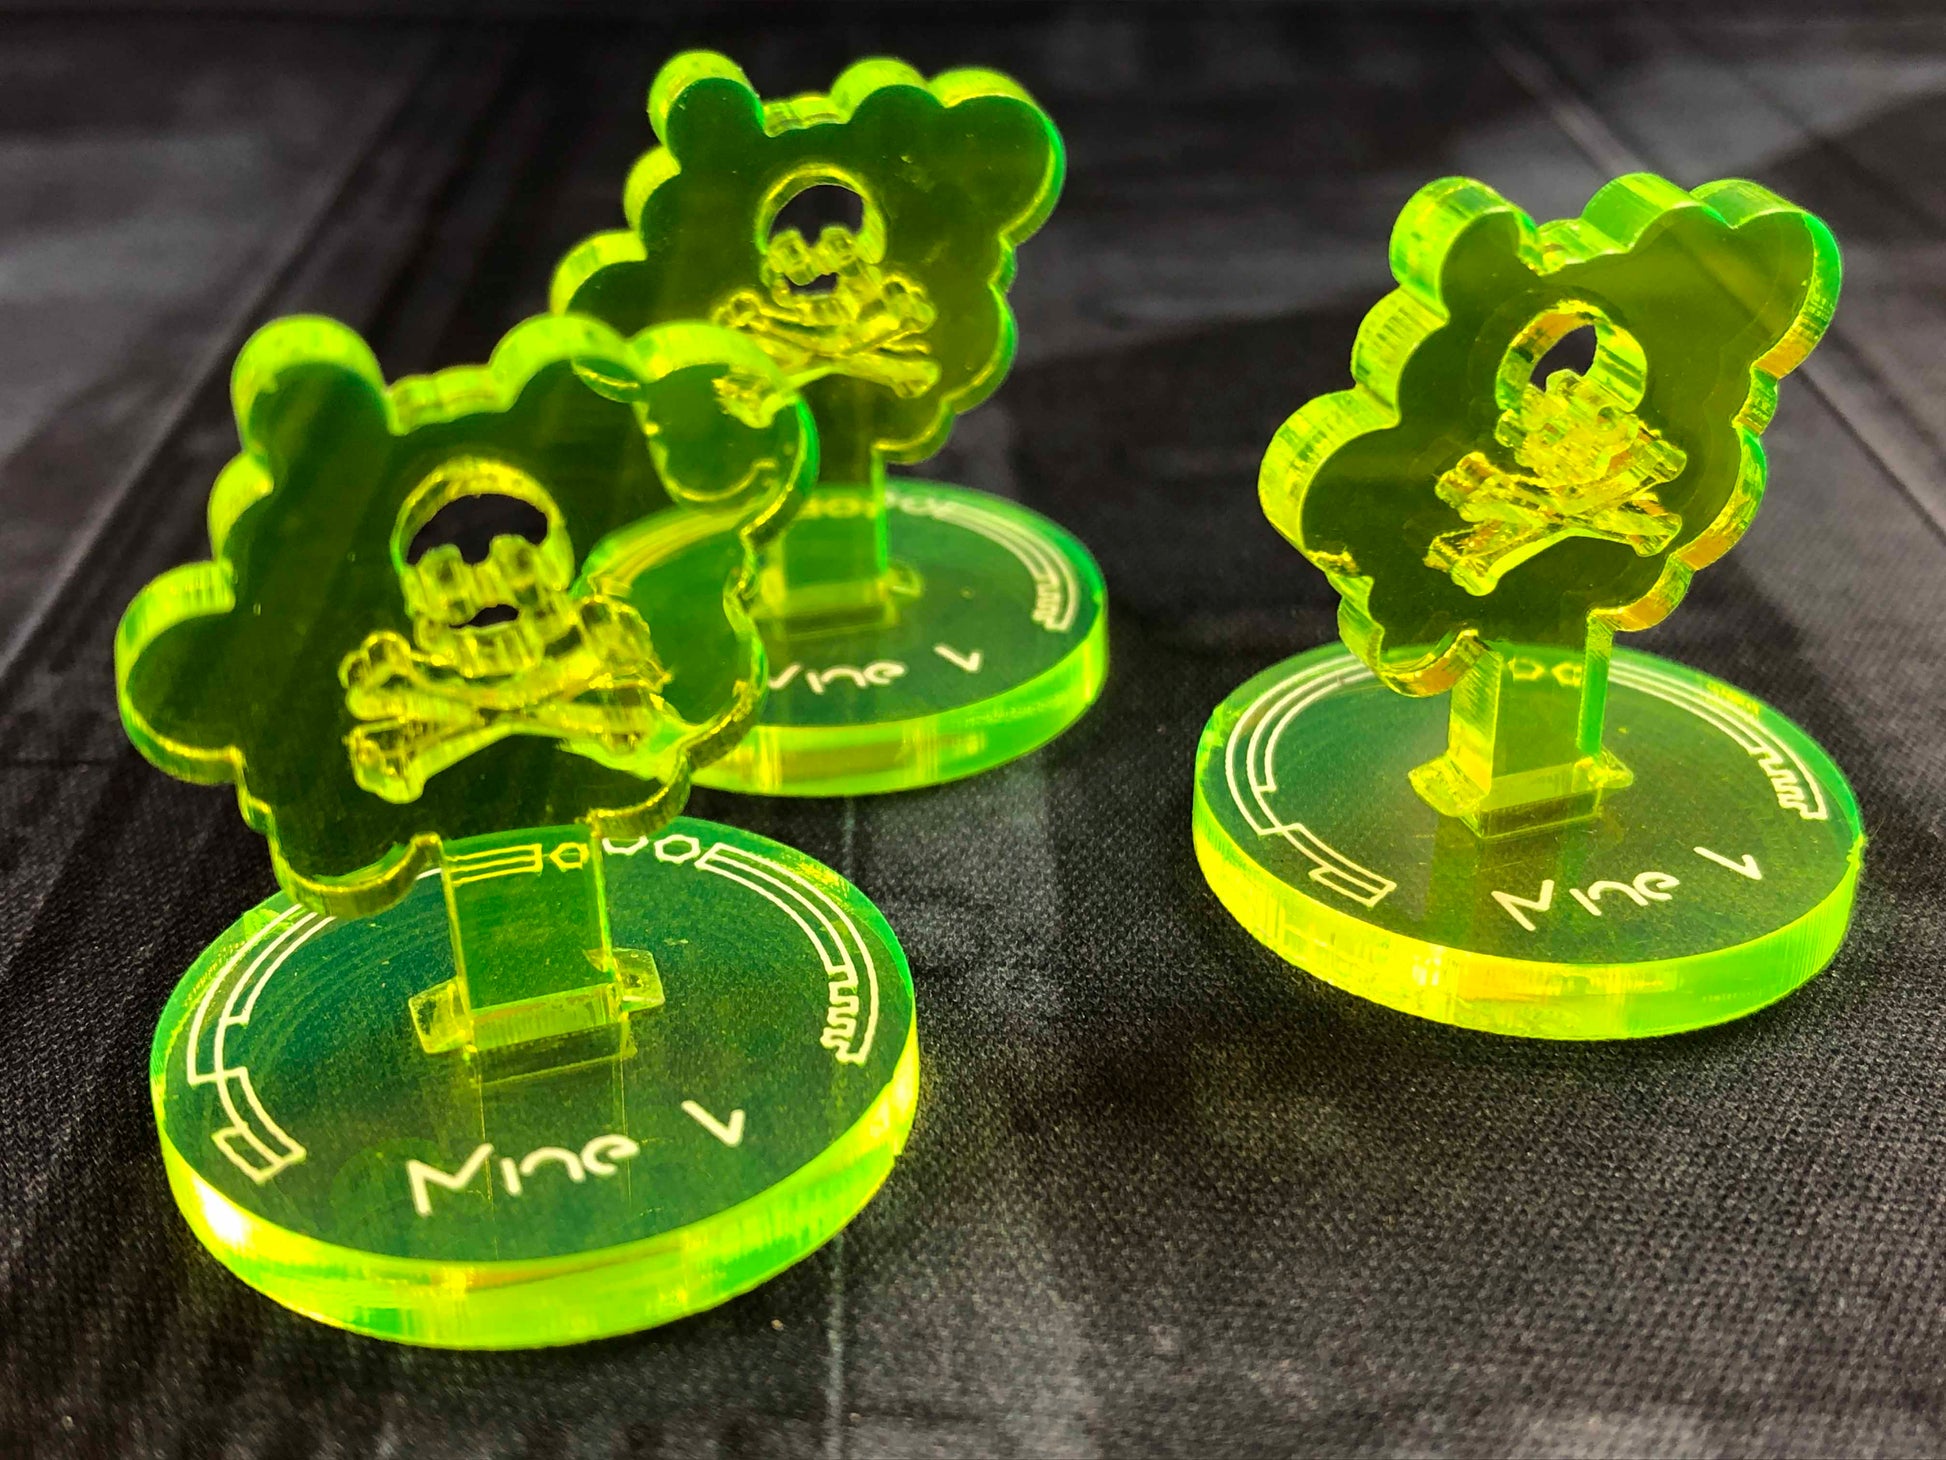 Infinity Viral Mines tokens